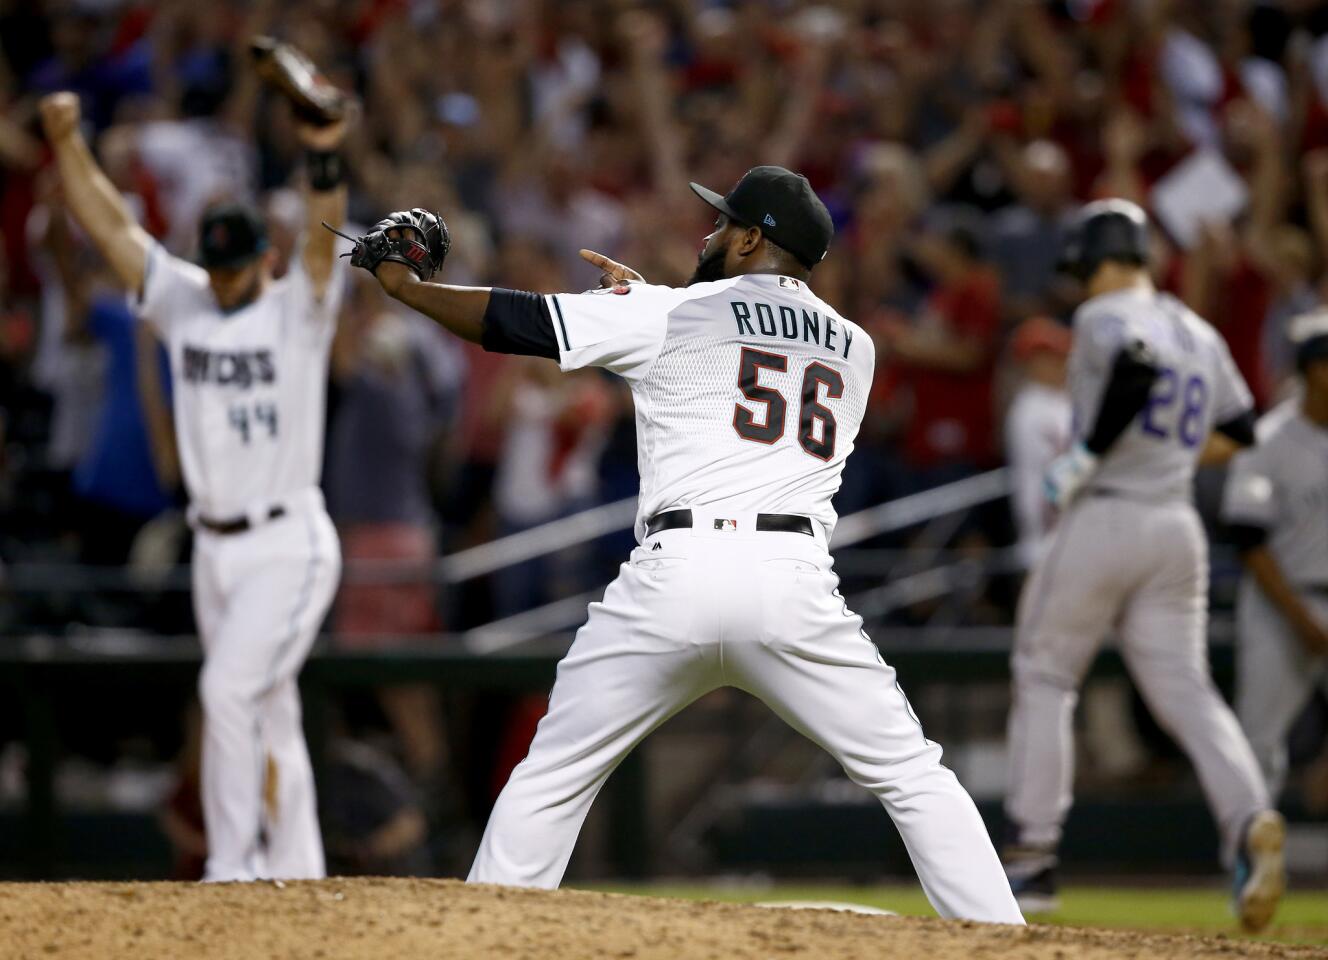 Arizona Diamondbacks relief pitcher Fernando Rodney (56) celebrates after the National League wild-card playoff baseball game against the Colorado Rockies, Wednesday, Oct. 4, 2017, in Phoenix. The Diamondbacks won 11-8 to advance to an NLDS against the Los Angeles Dodgers. (AP Photo/Ross D. Franklin)